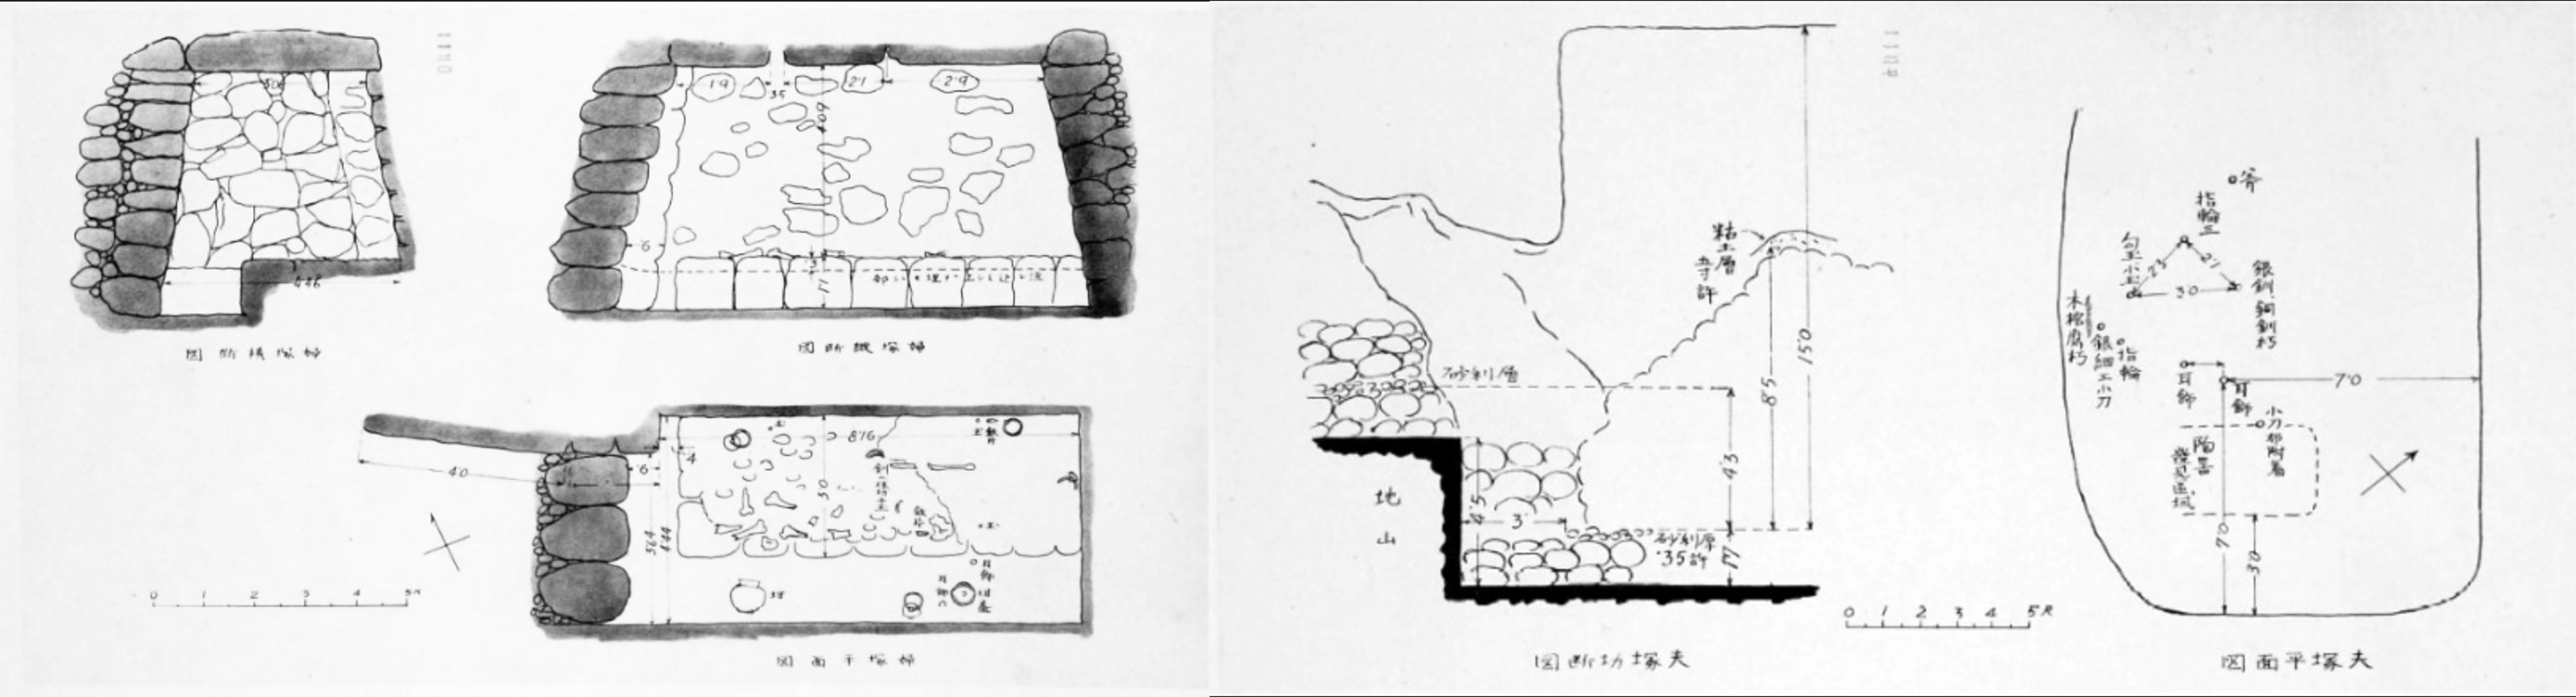 Plan of the stone-chamber tomb with corridor entrance (left) and wooden-chamber tomb with stone mound (right). Both drawings were made in 1915